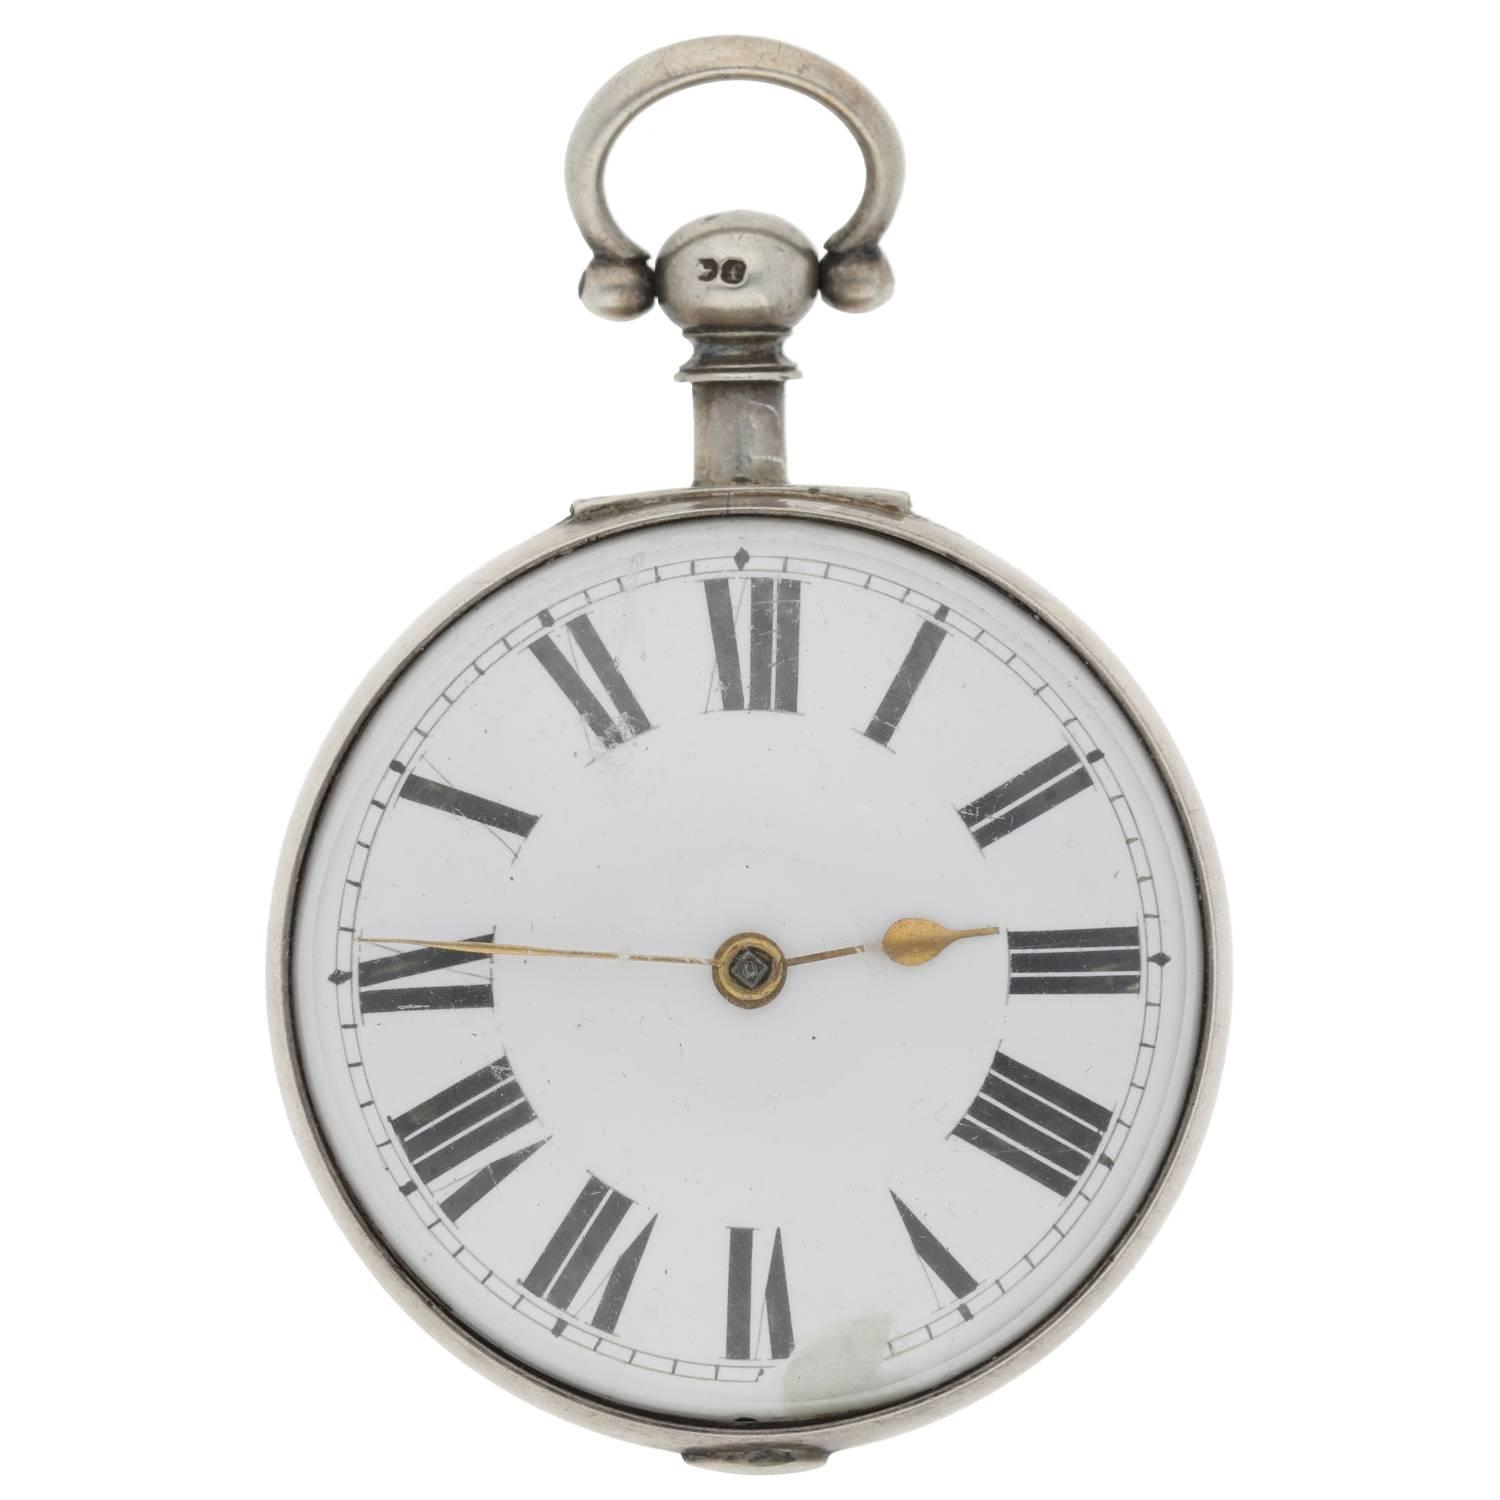 English George IV silver verge pocket watch, London 1821, unsigned fusee movement, no. 359, sprung